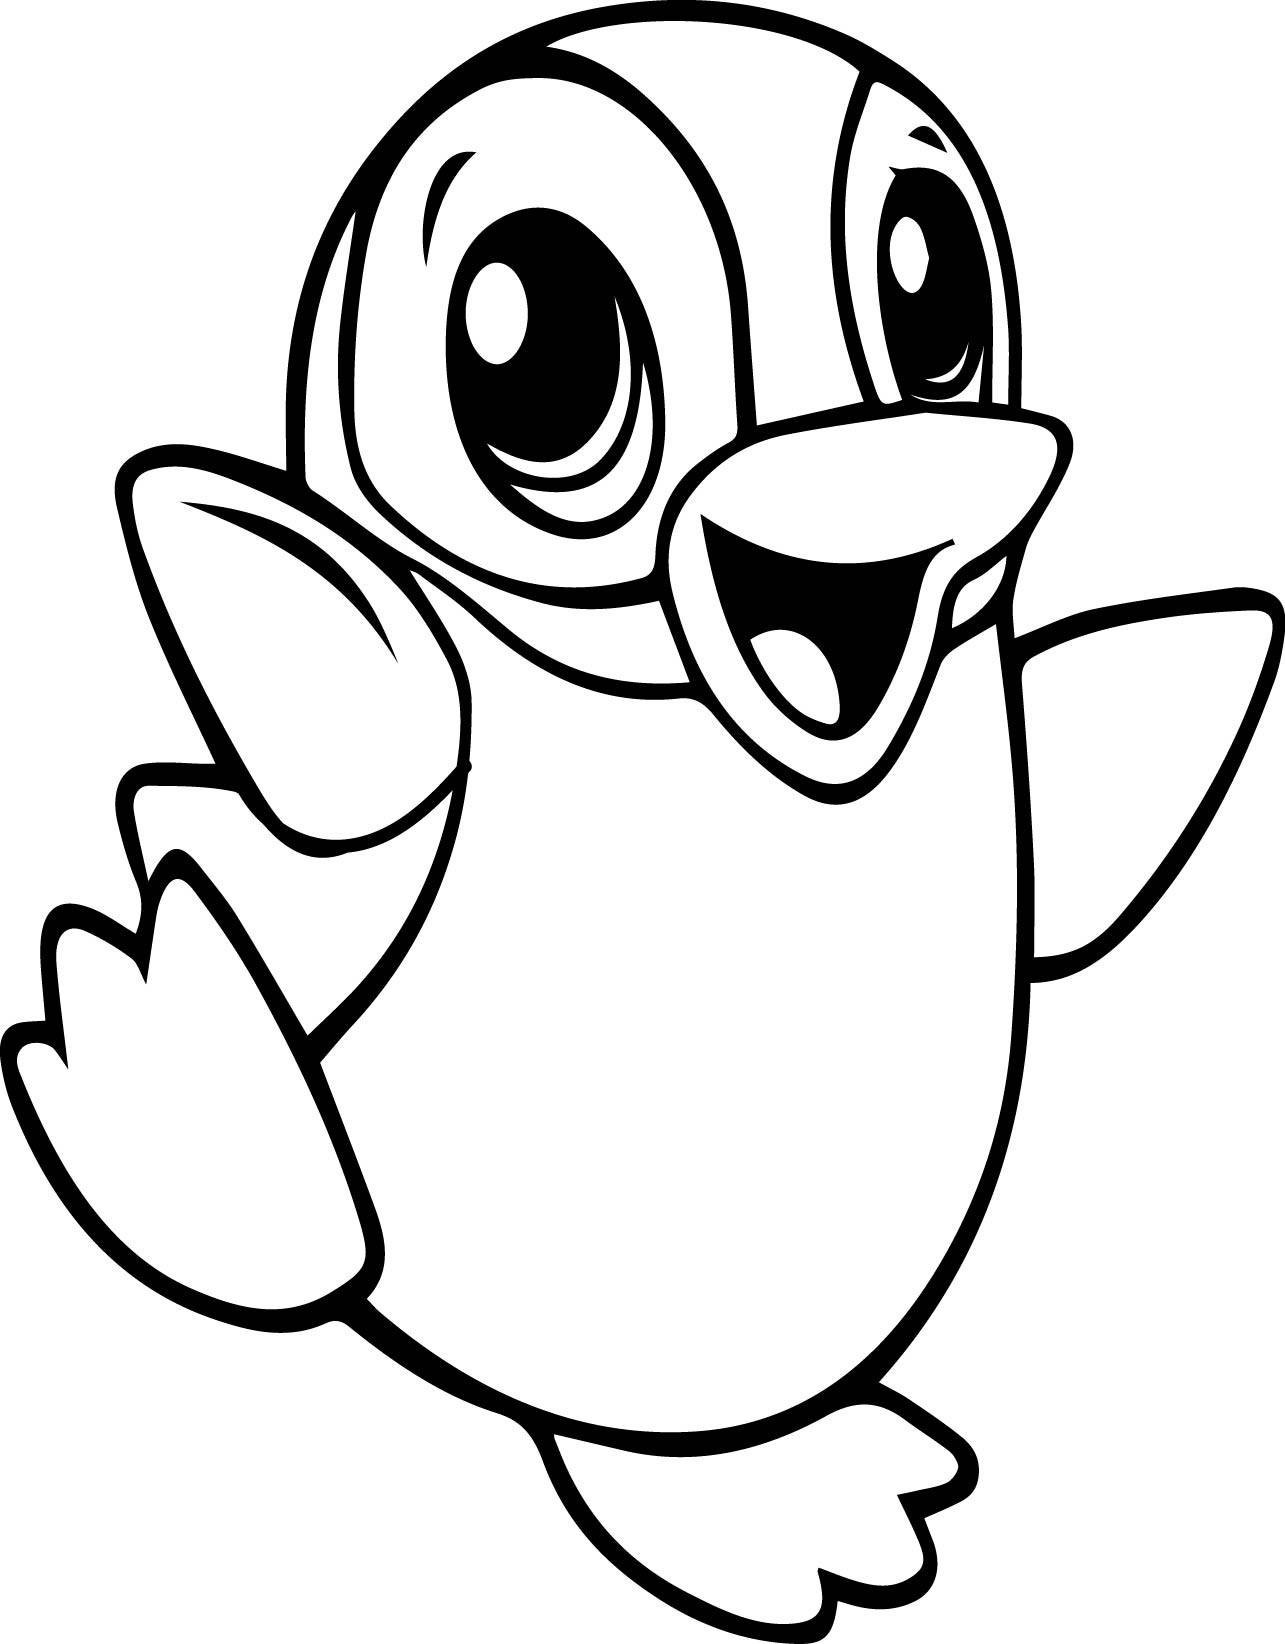 Cute Baby Animal Coloring Pages Printable
 Cute Animal Coloring Pages Best Coloring Pages For Kids